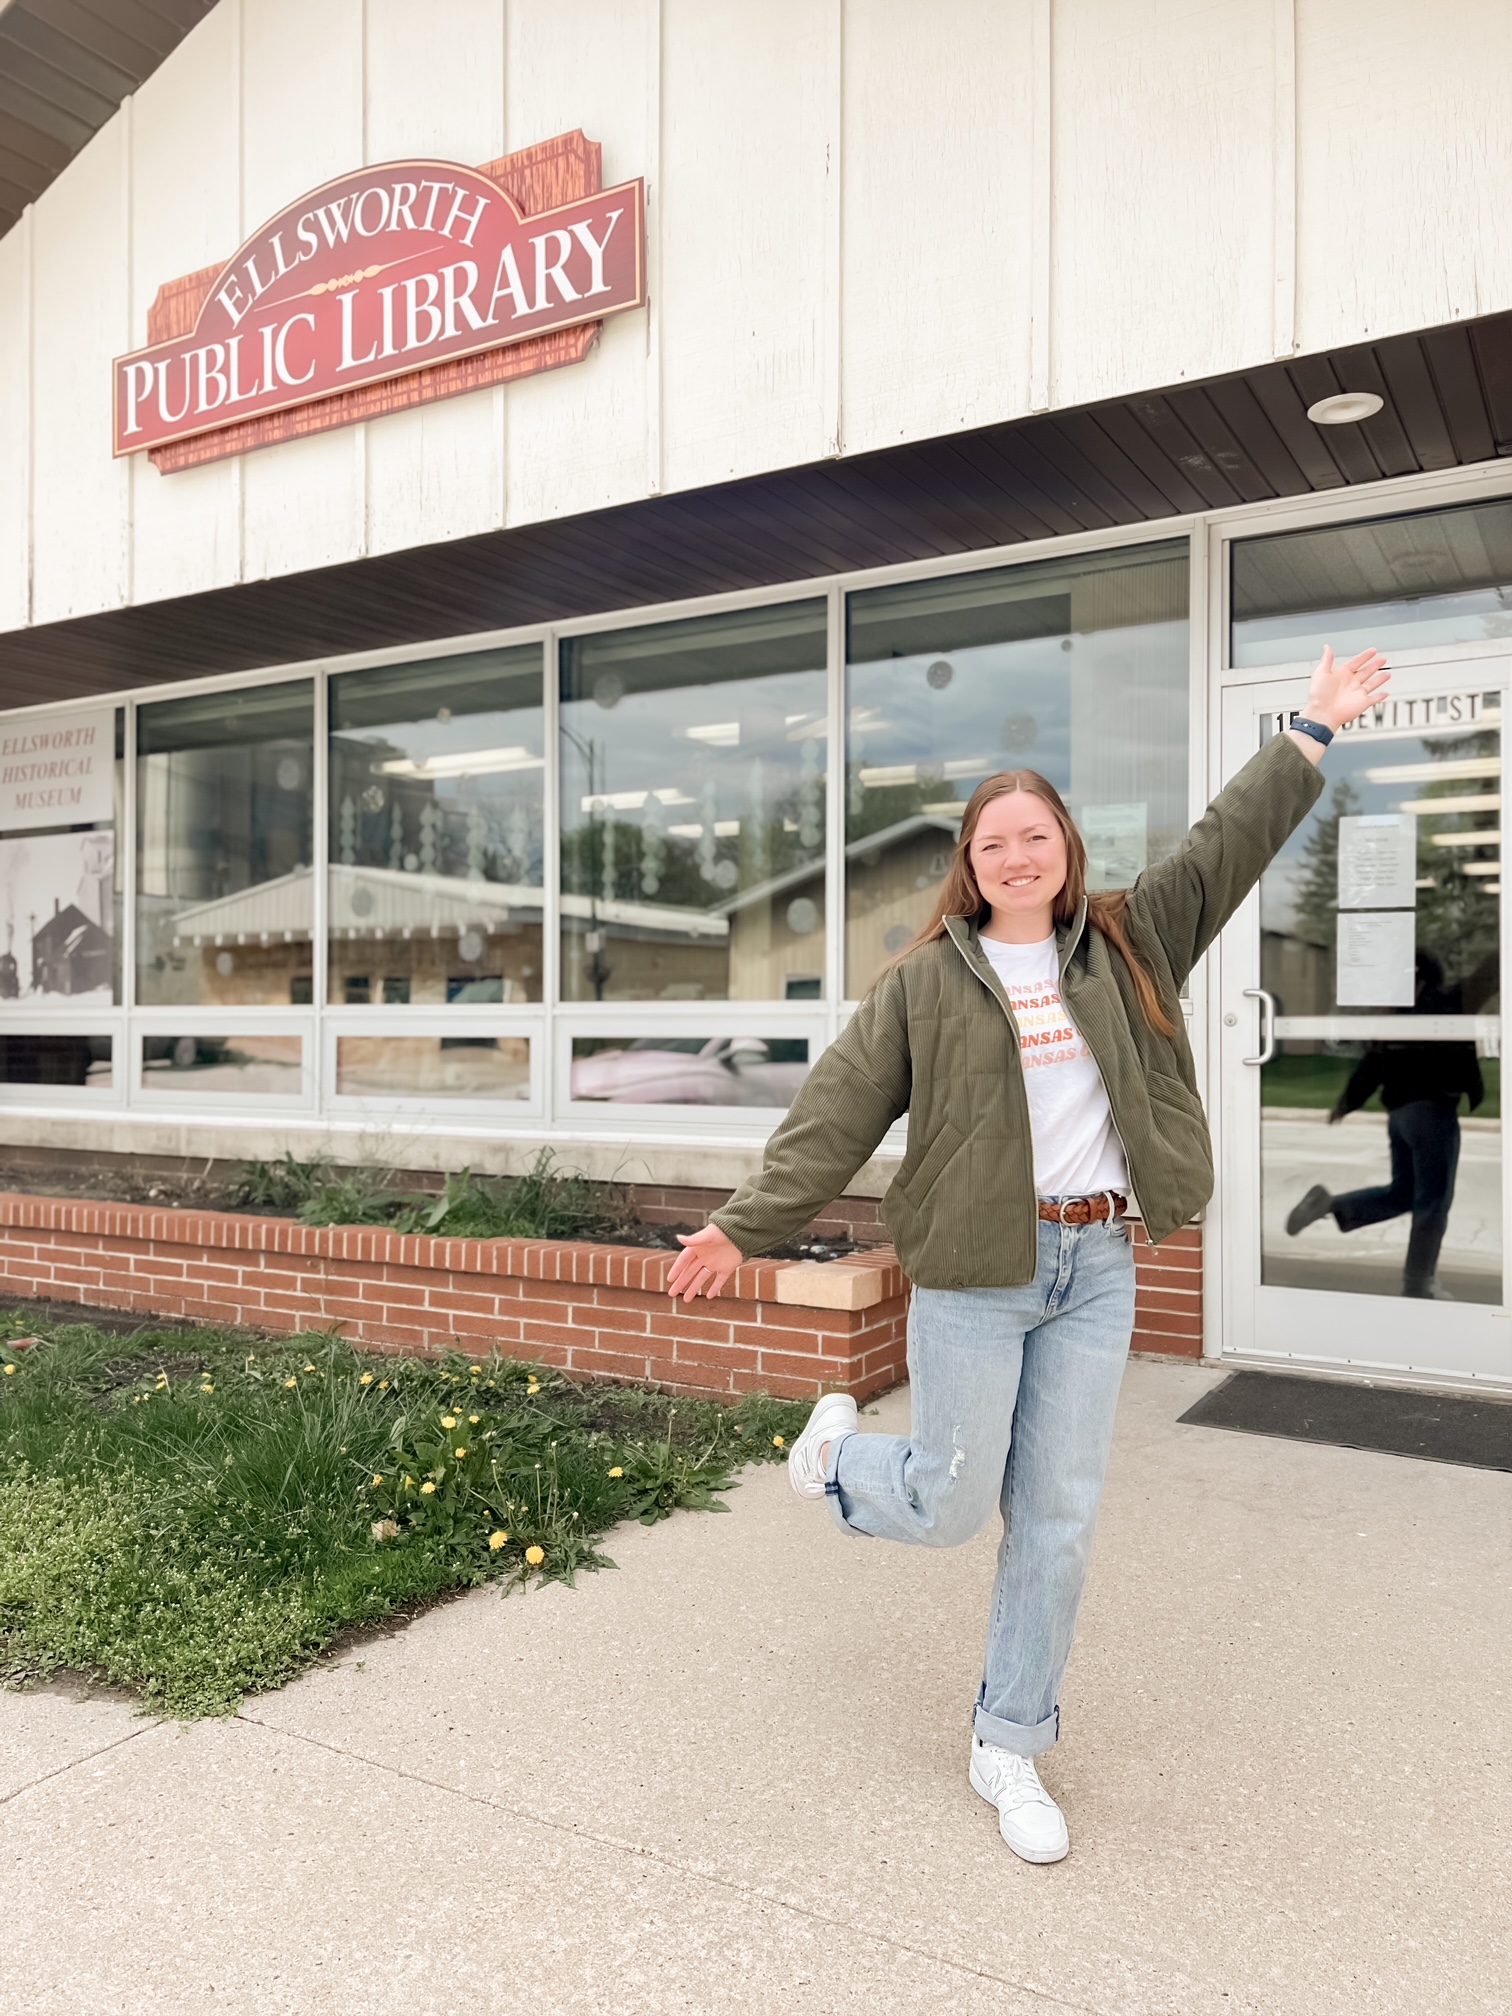 Karlie posing outside the building with the Ellsworth Public Library sign behind her